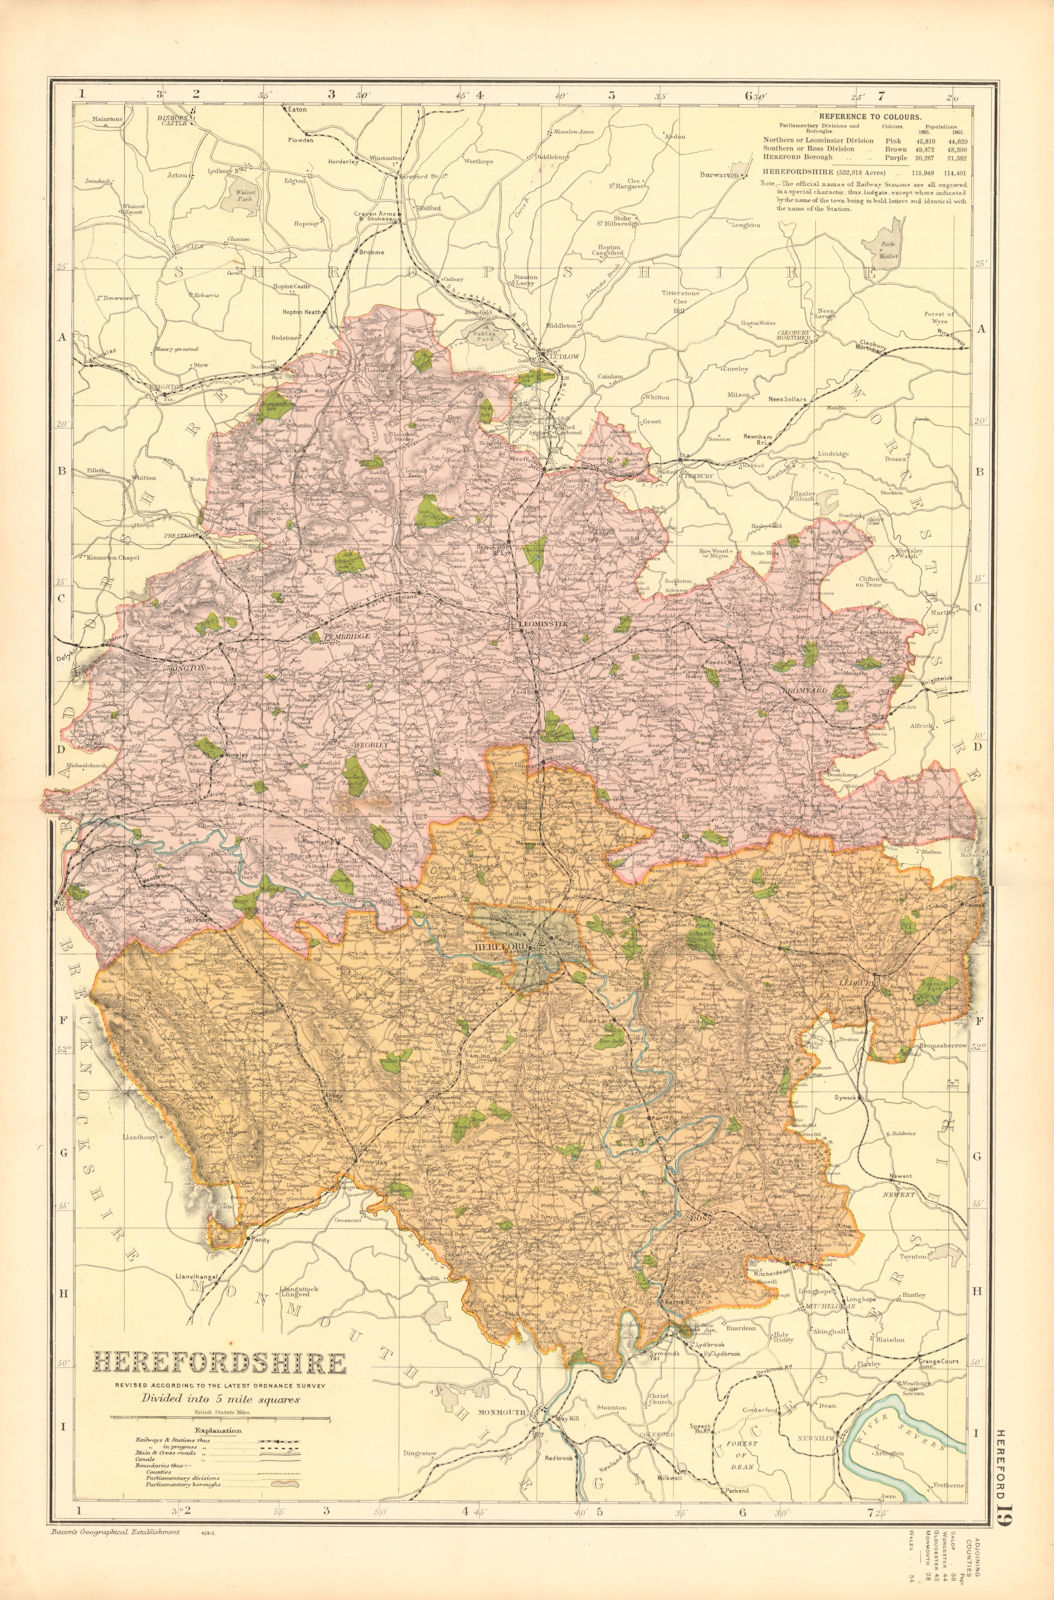 Associate Product HEREFORDSHIRE. Showing Parliamentary divisions, boroughs & parks. BACON 1904 map